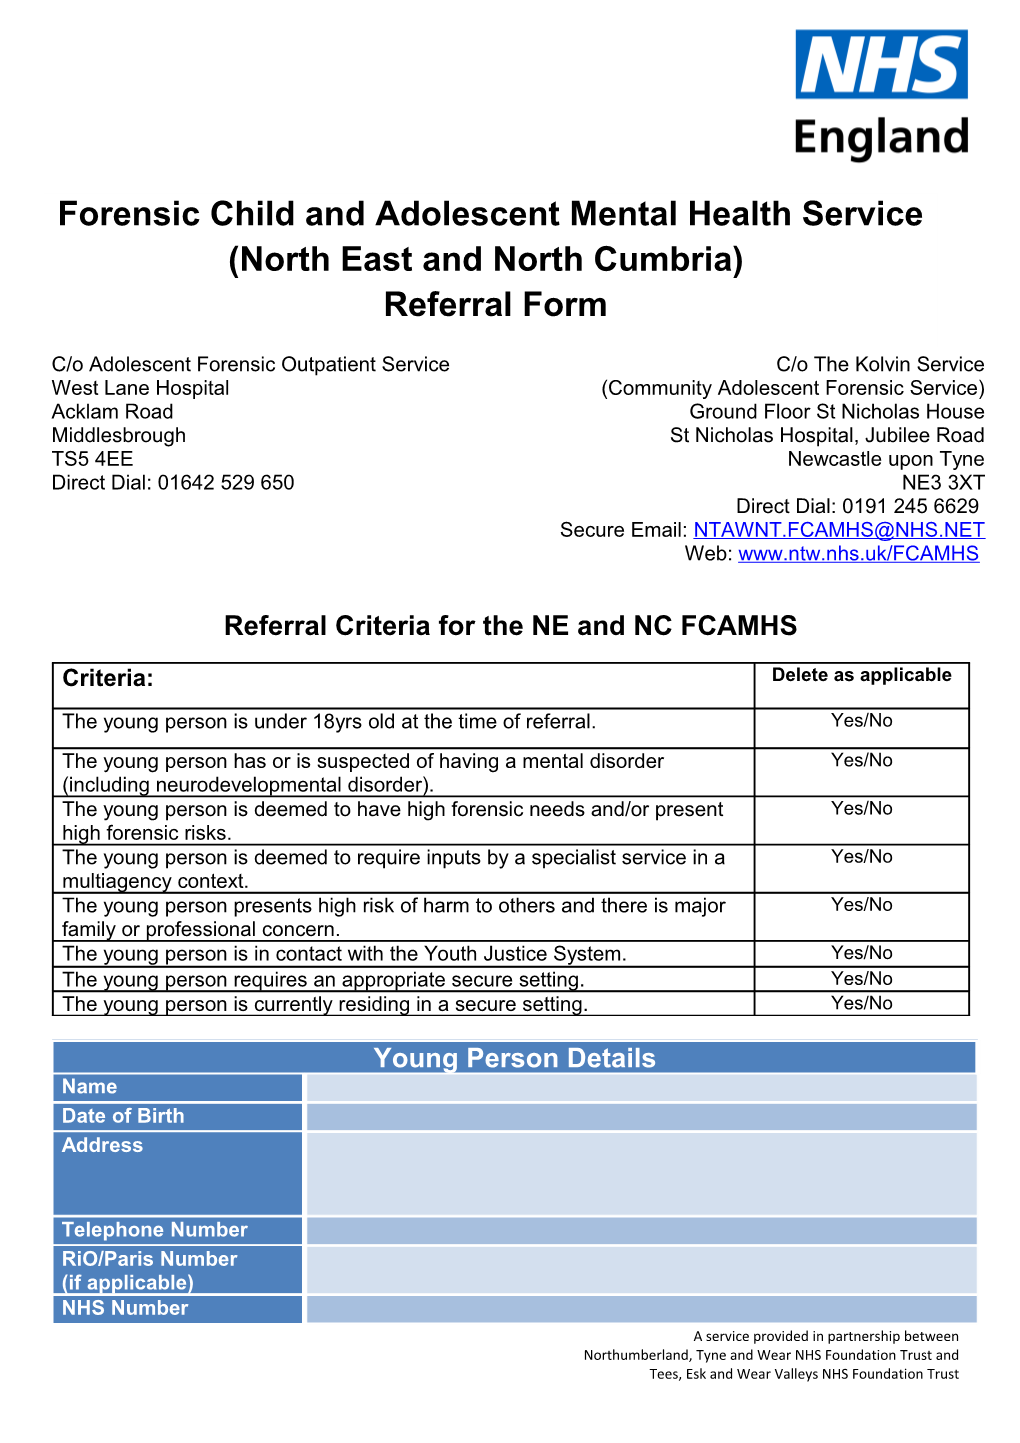 Referral Criteria for Thene and NC FCAMHS